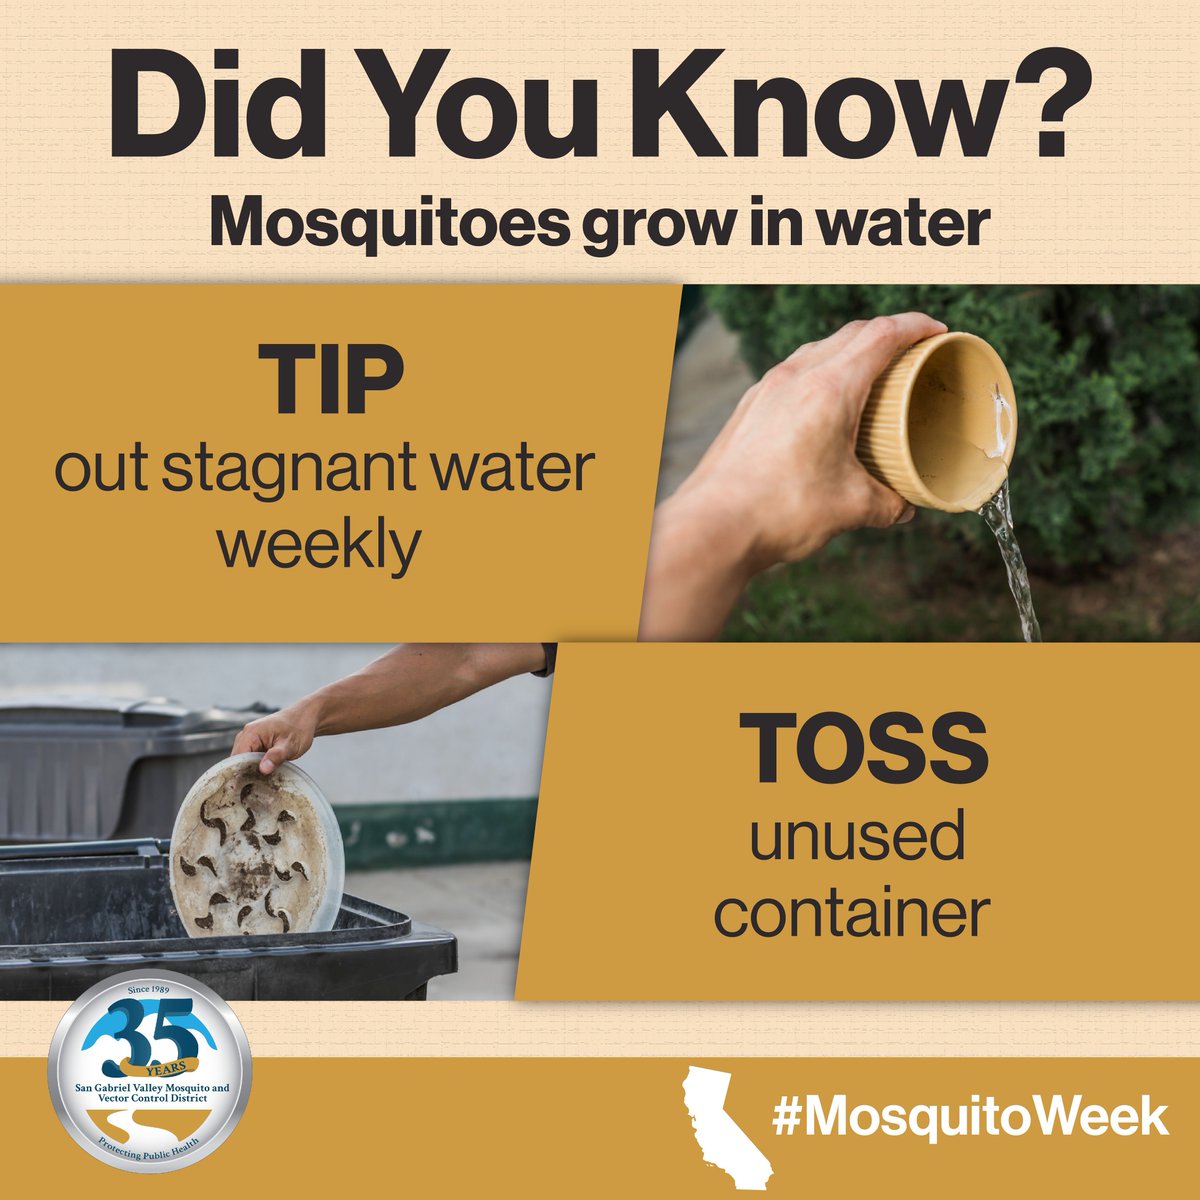 Stop mosquitoes at the source! Stagnant water is where mosquitoes grow. Take charge of your surroundings by tipping out stagnant water and tossing out the source. Together, let's #FightTheBite and keep our communities mosquito-free! #MosquitoWeek #SGVmosquito35th